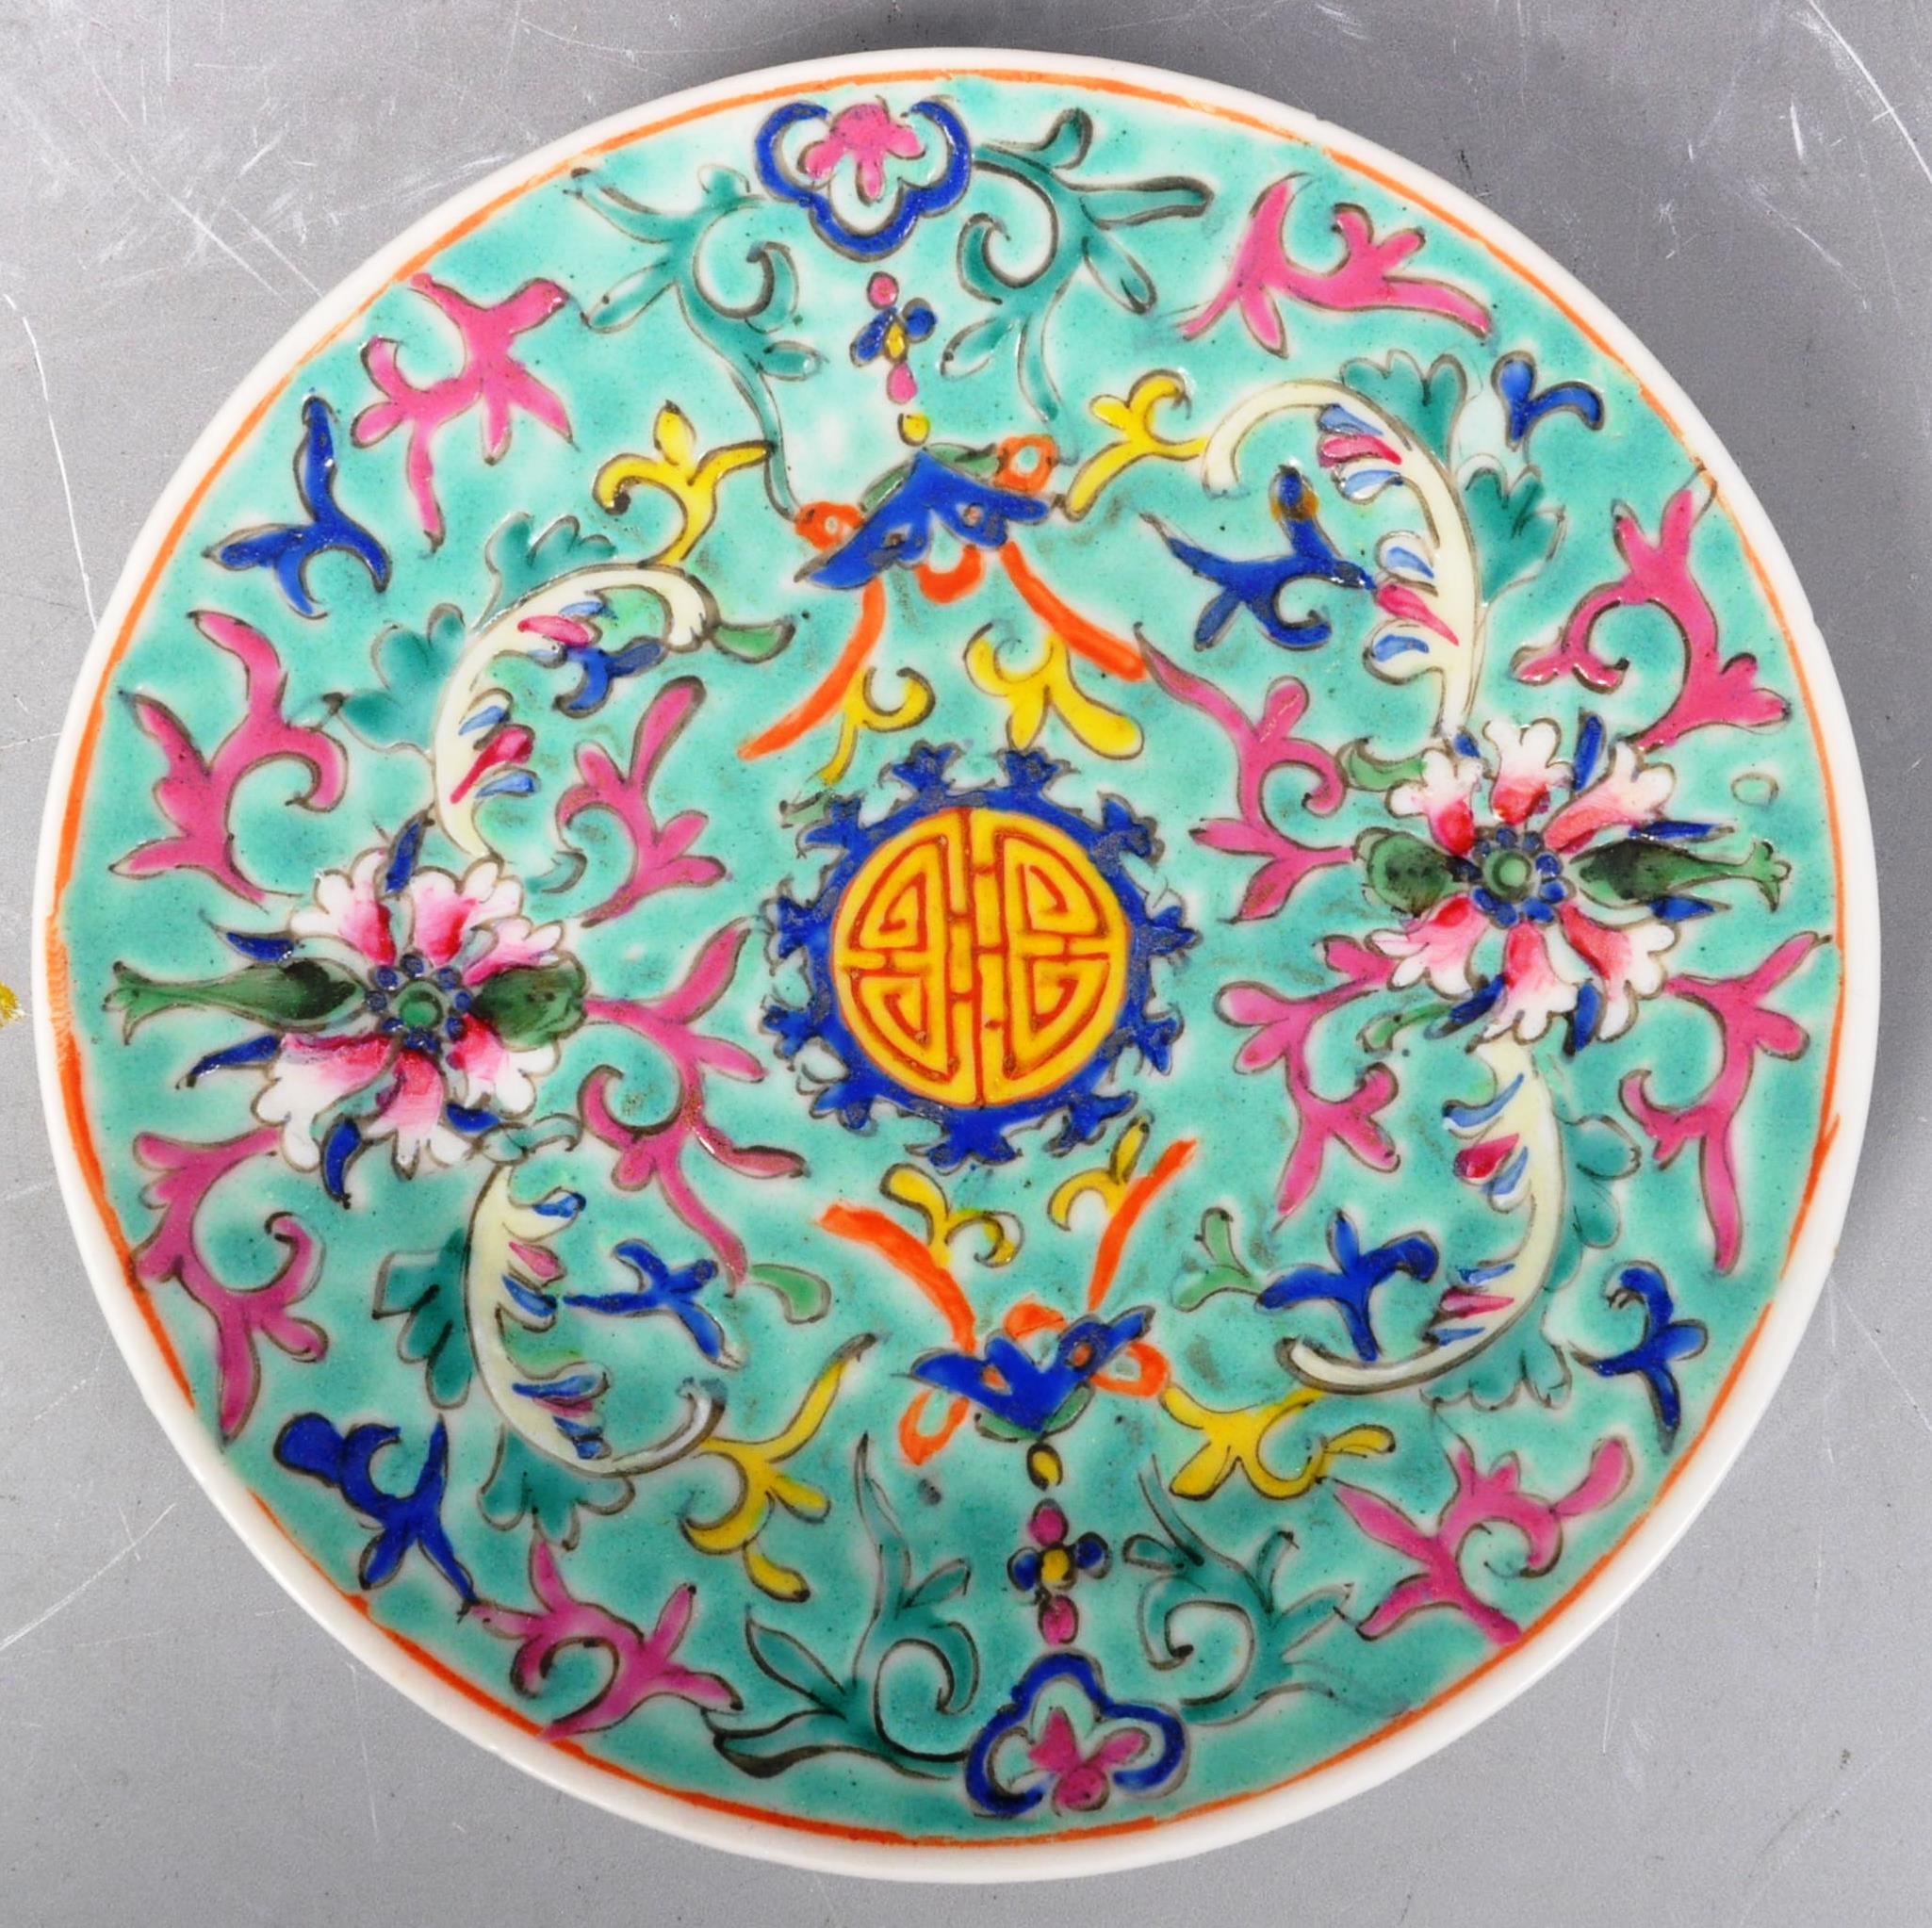 EARLY 20TH CENTURY CHINESE PORCELAIN CUP & SAUCER - Image 5 of 9